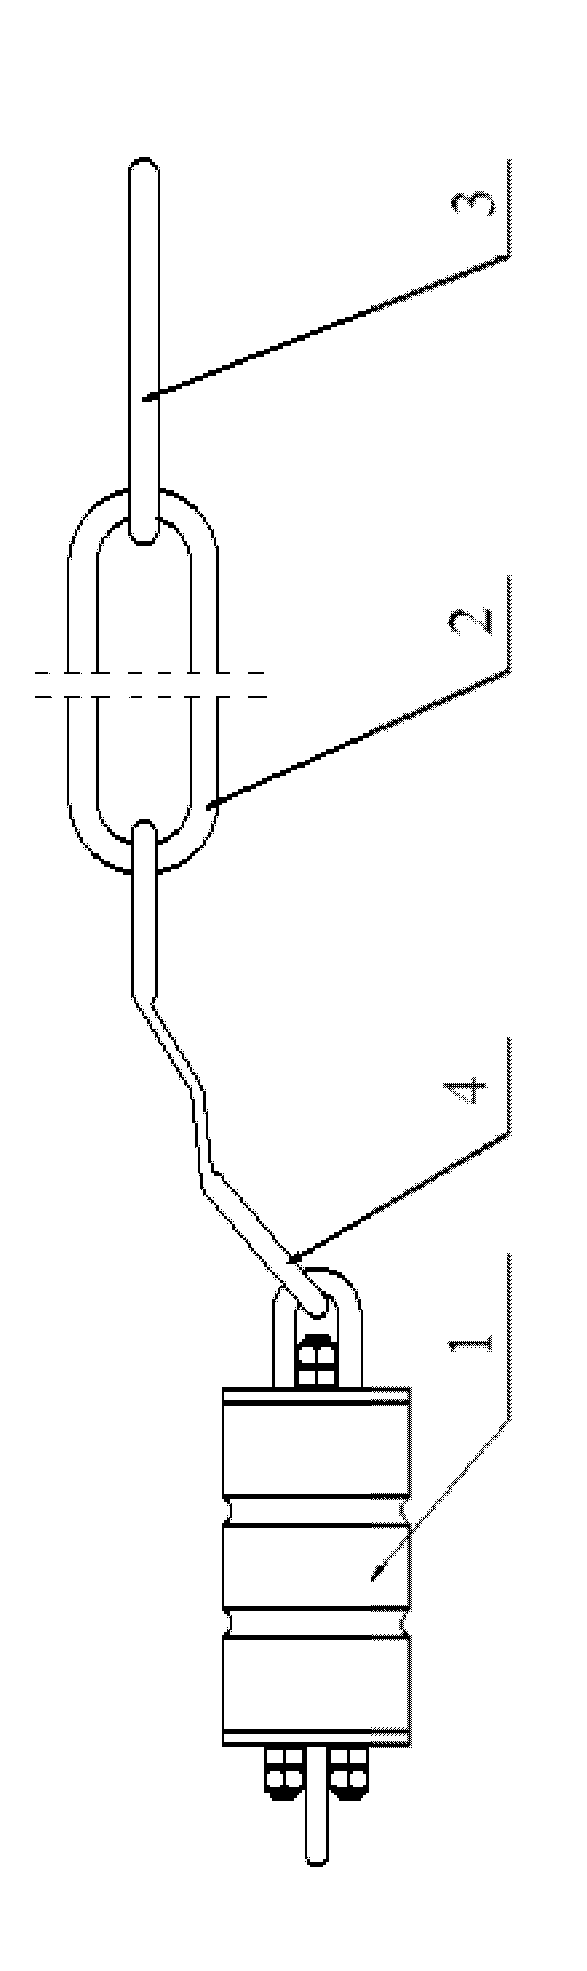 A device to reduce buffer force